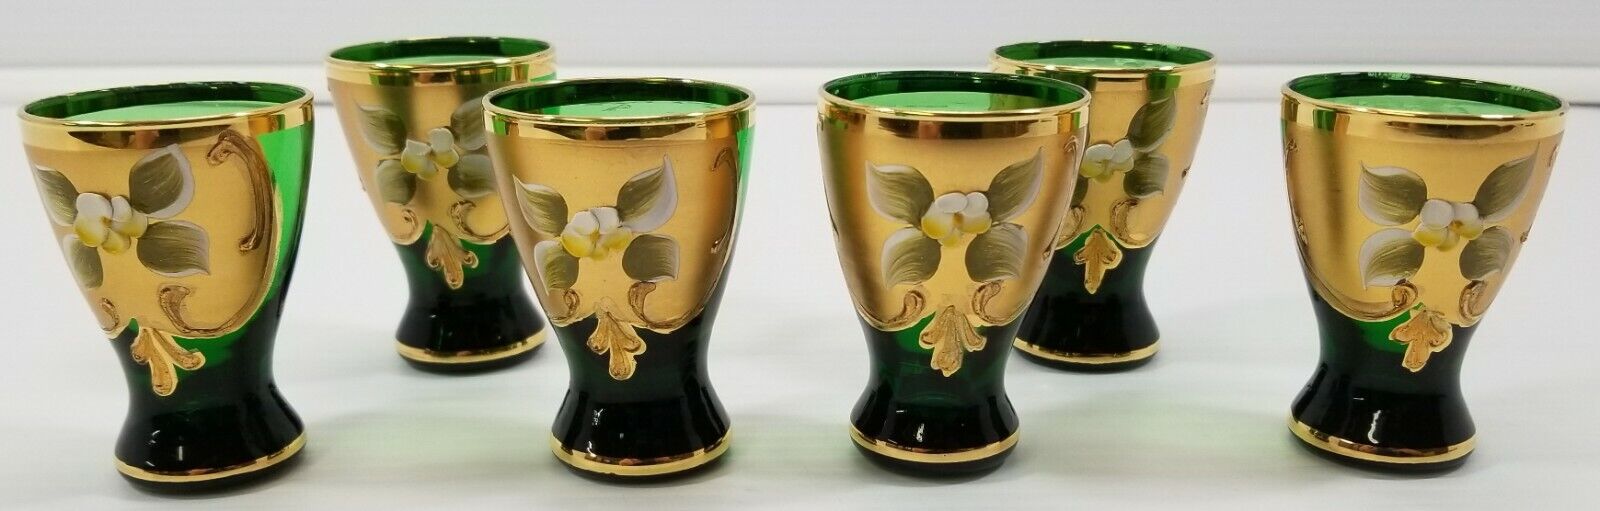 VC) Vintage Set of 6 Murano Green Gold Tone Floral Shot Glasses Italy